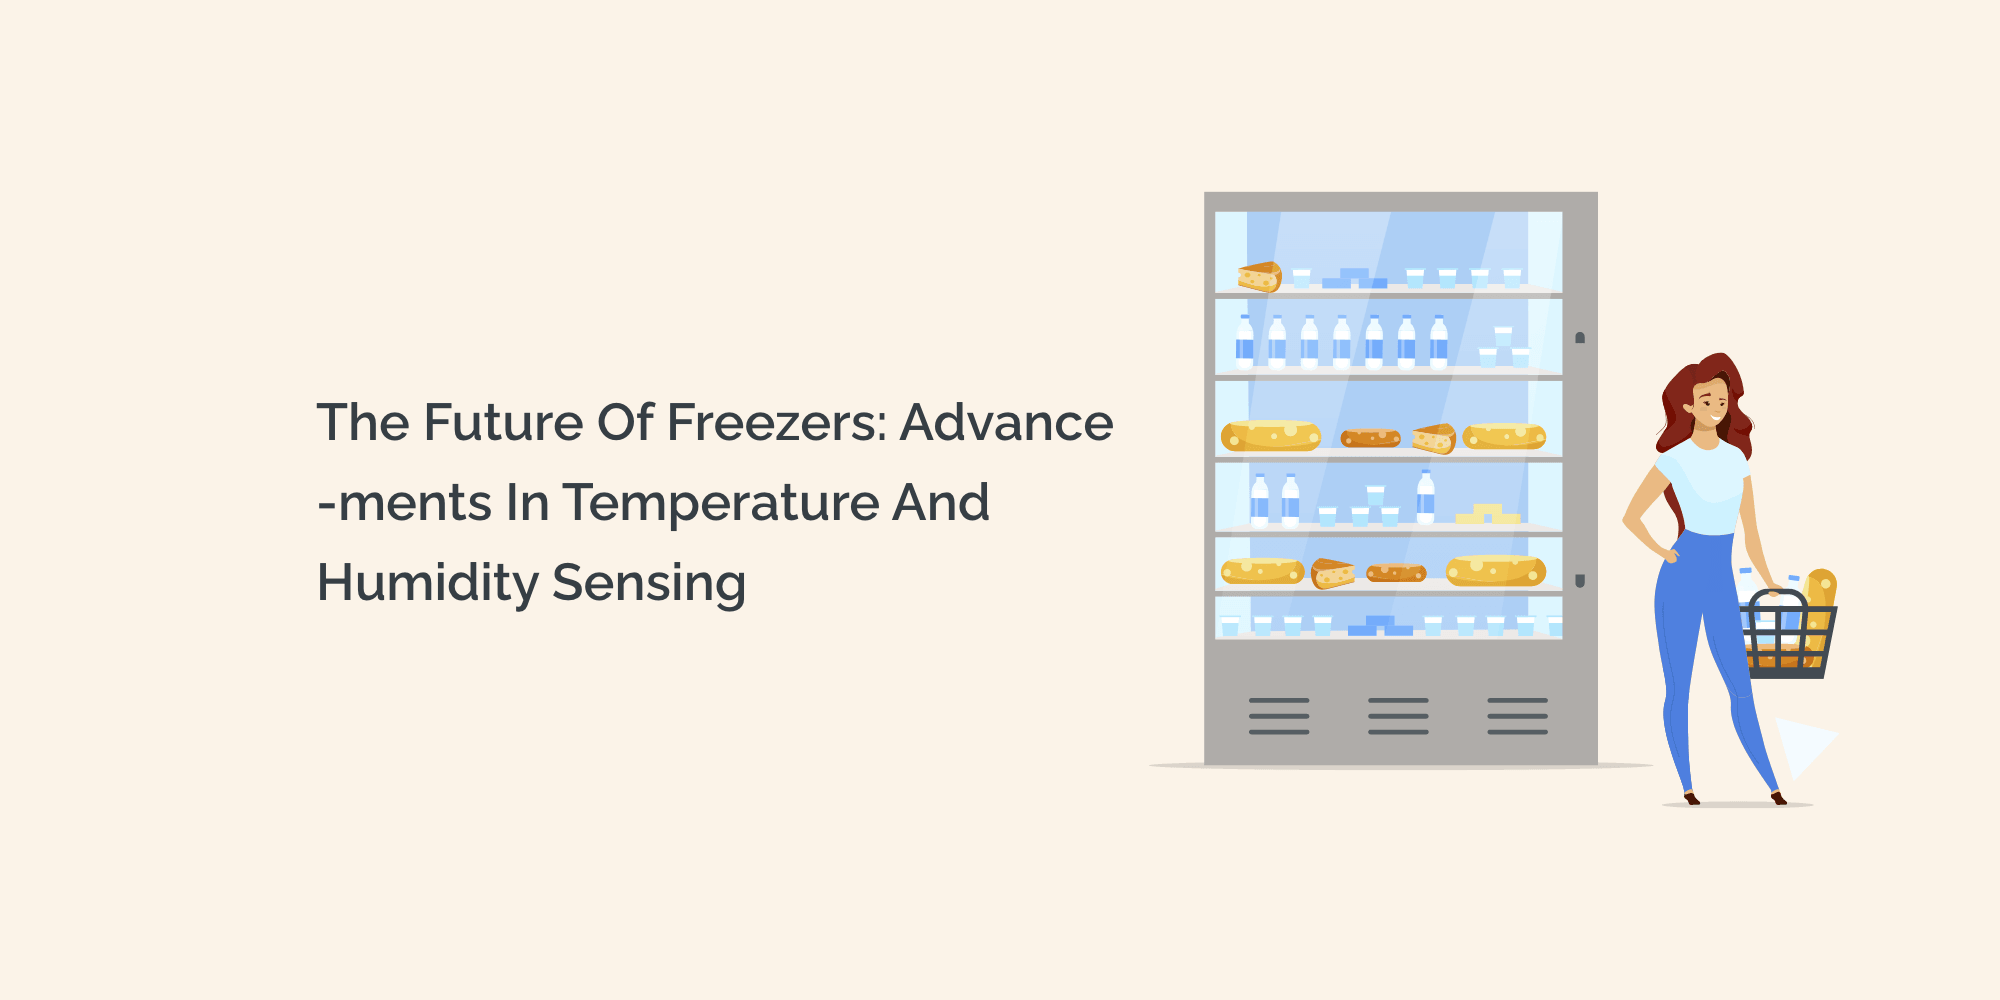 The Future of Freezers: Advancements in Temperature and Humidity Sensing